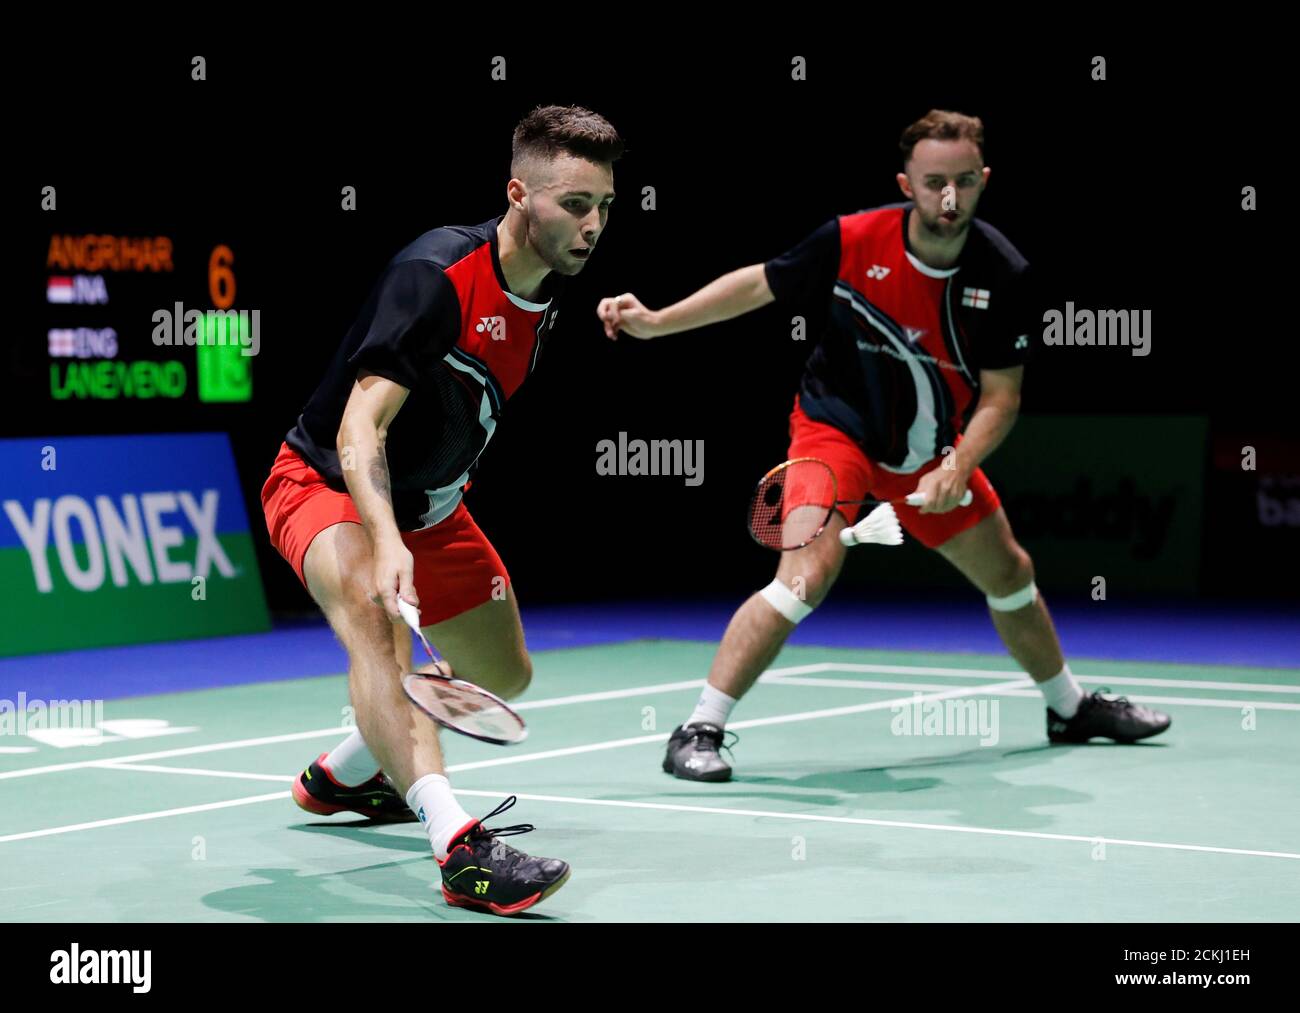 2019 Badminton World Championships - St. Jakobshalle Basel, Basel,  Switzerland - August 20, 2019 England's Sean Vendy and Ben Lane in action  during their first round men's doubles match against Indonesia's Berry